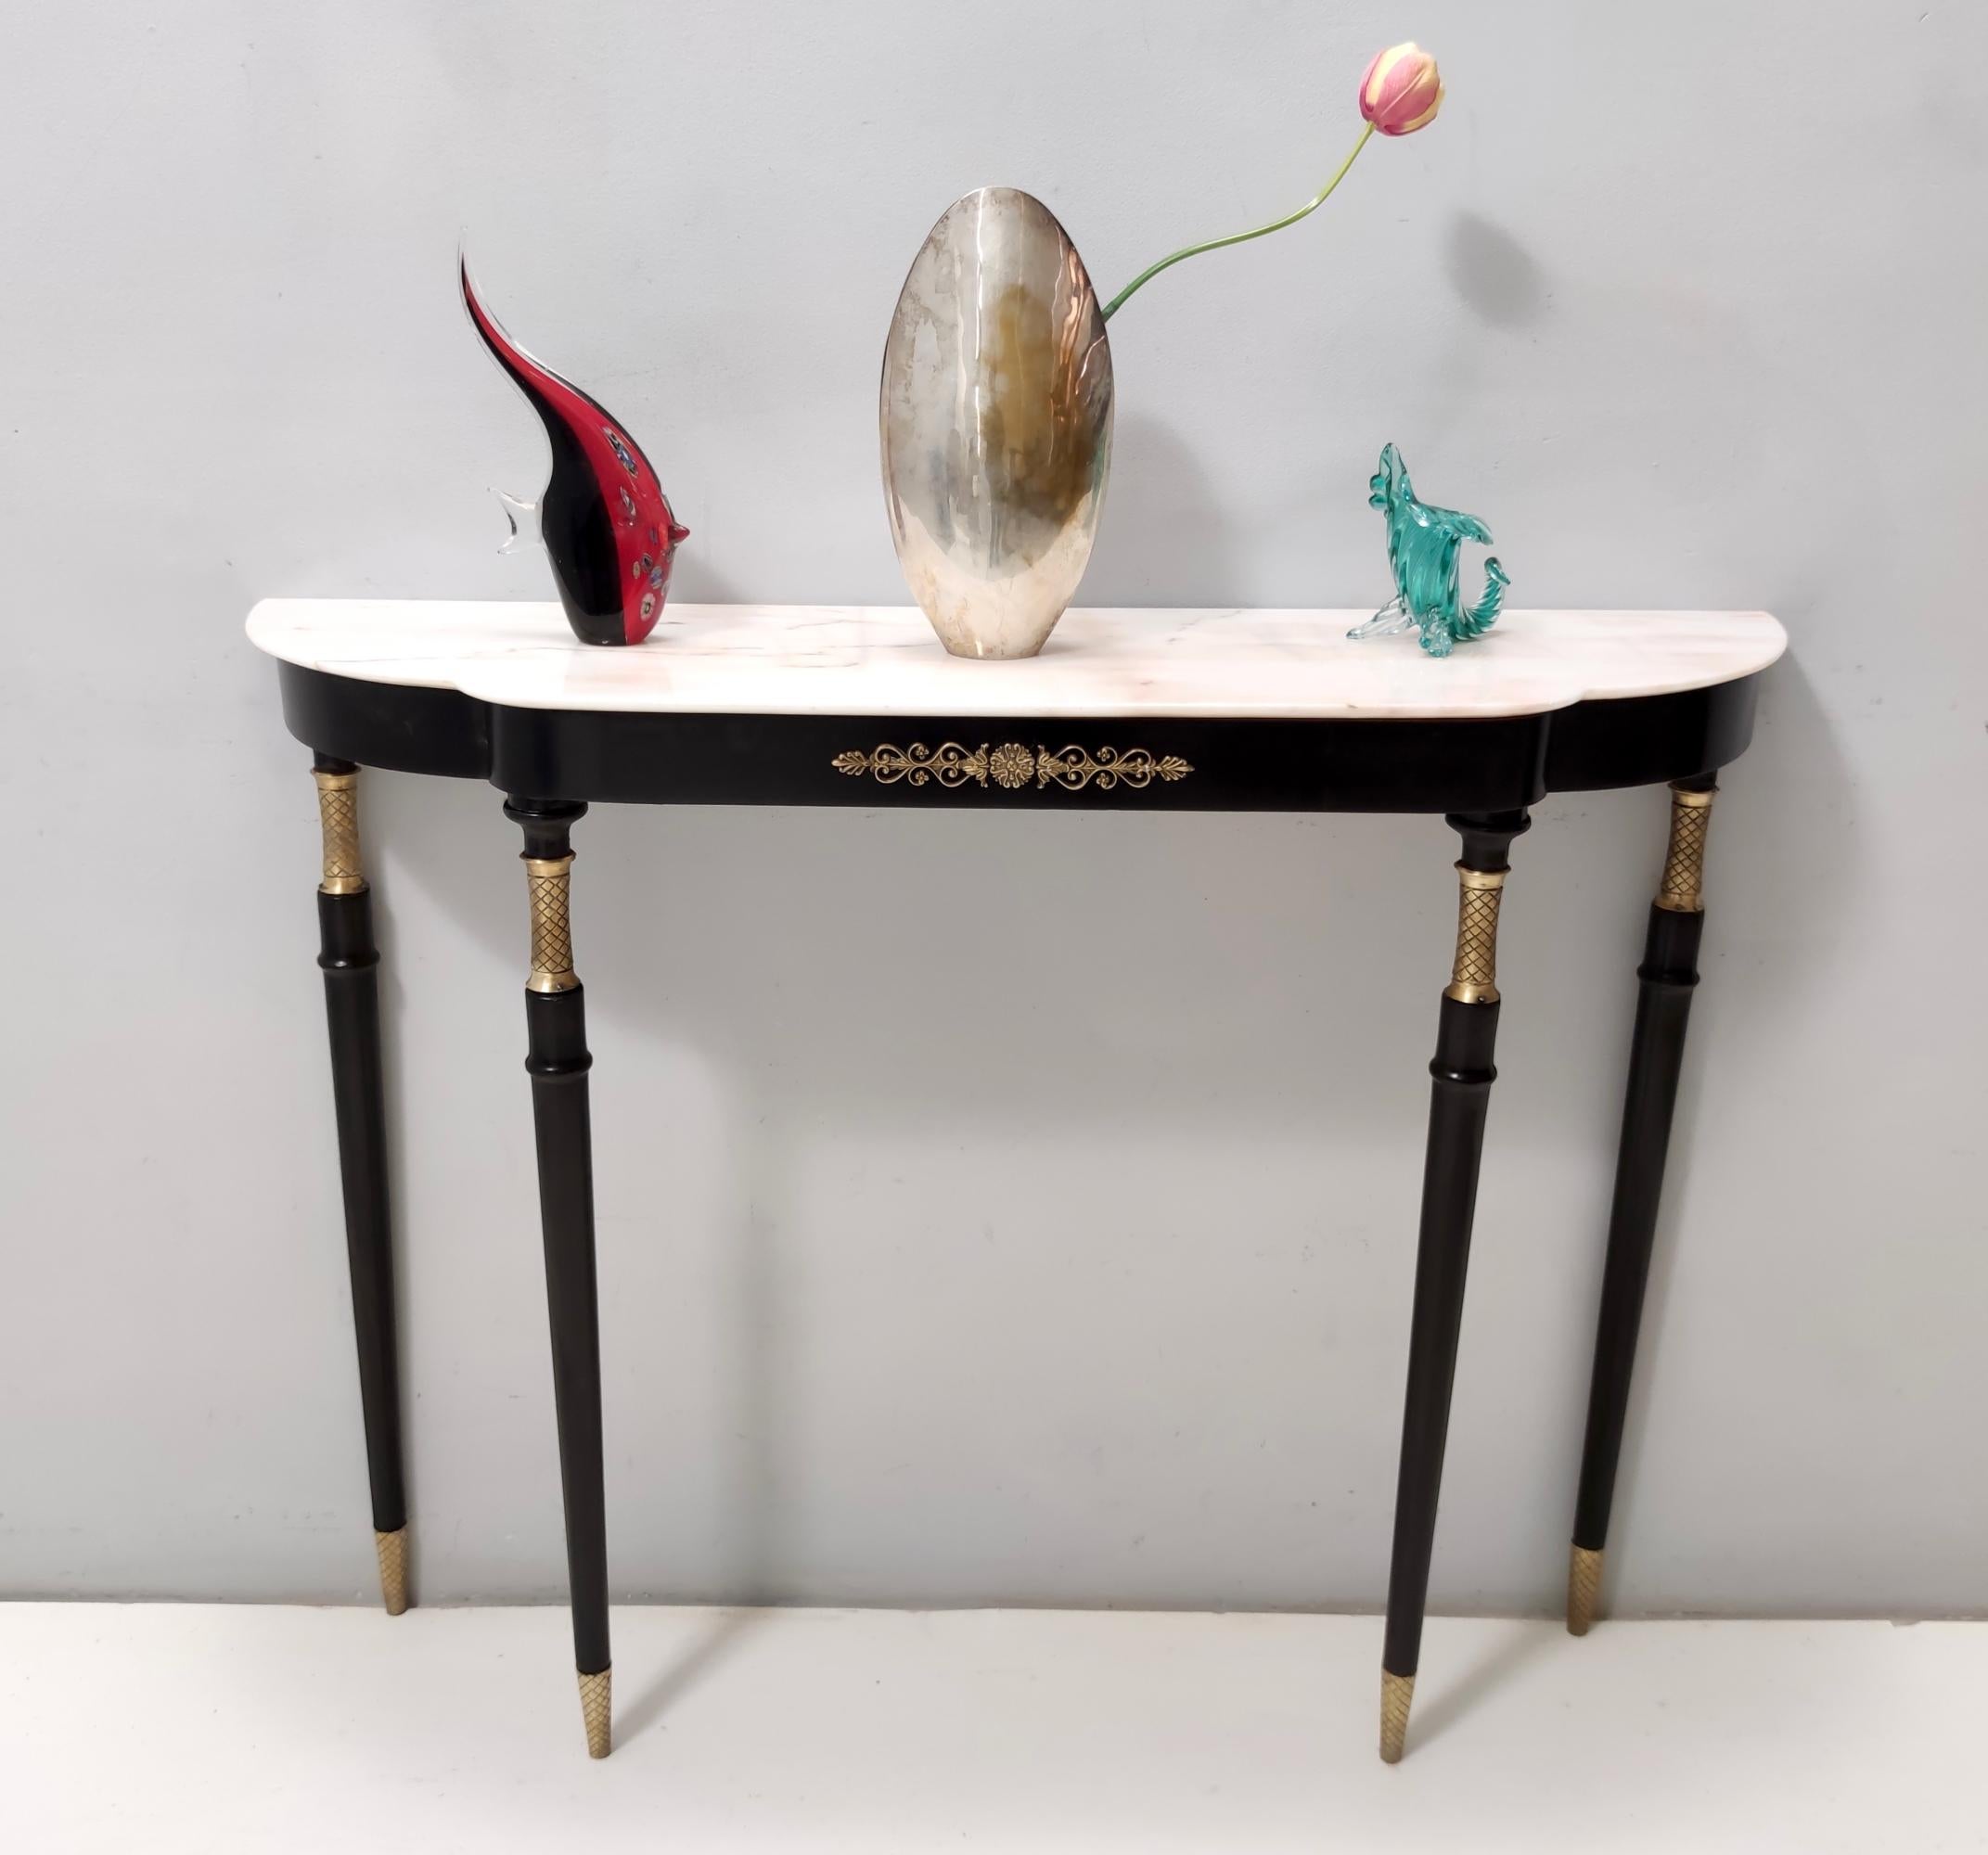 Made in Italy, 1950s - 1960s. 
It features a black lacquered beech frame with a Portuguese pink marble top and brass details and feet caps. 
This console might show slight traces of use since it's vintage, but it's been recently restored and